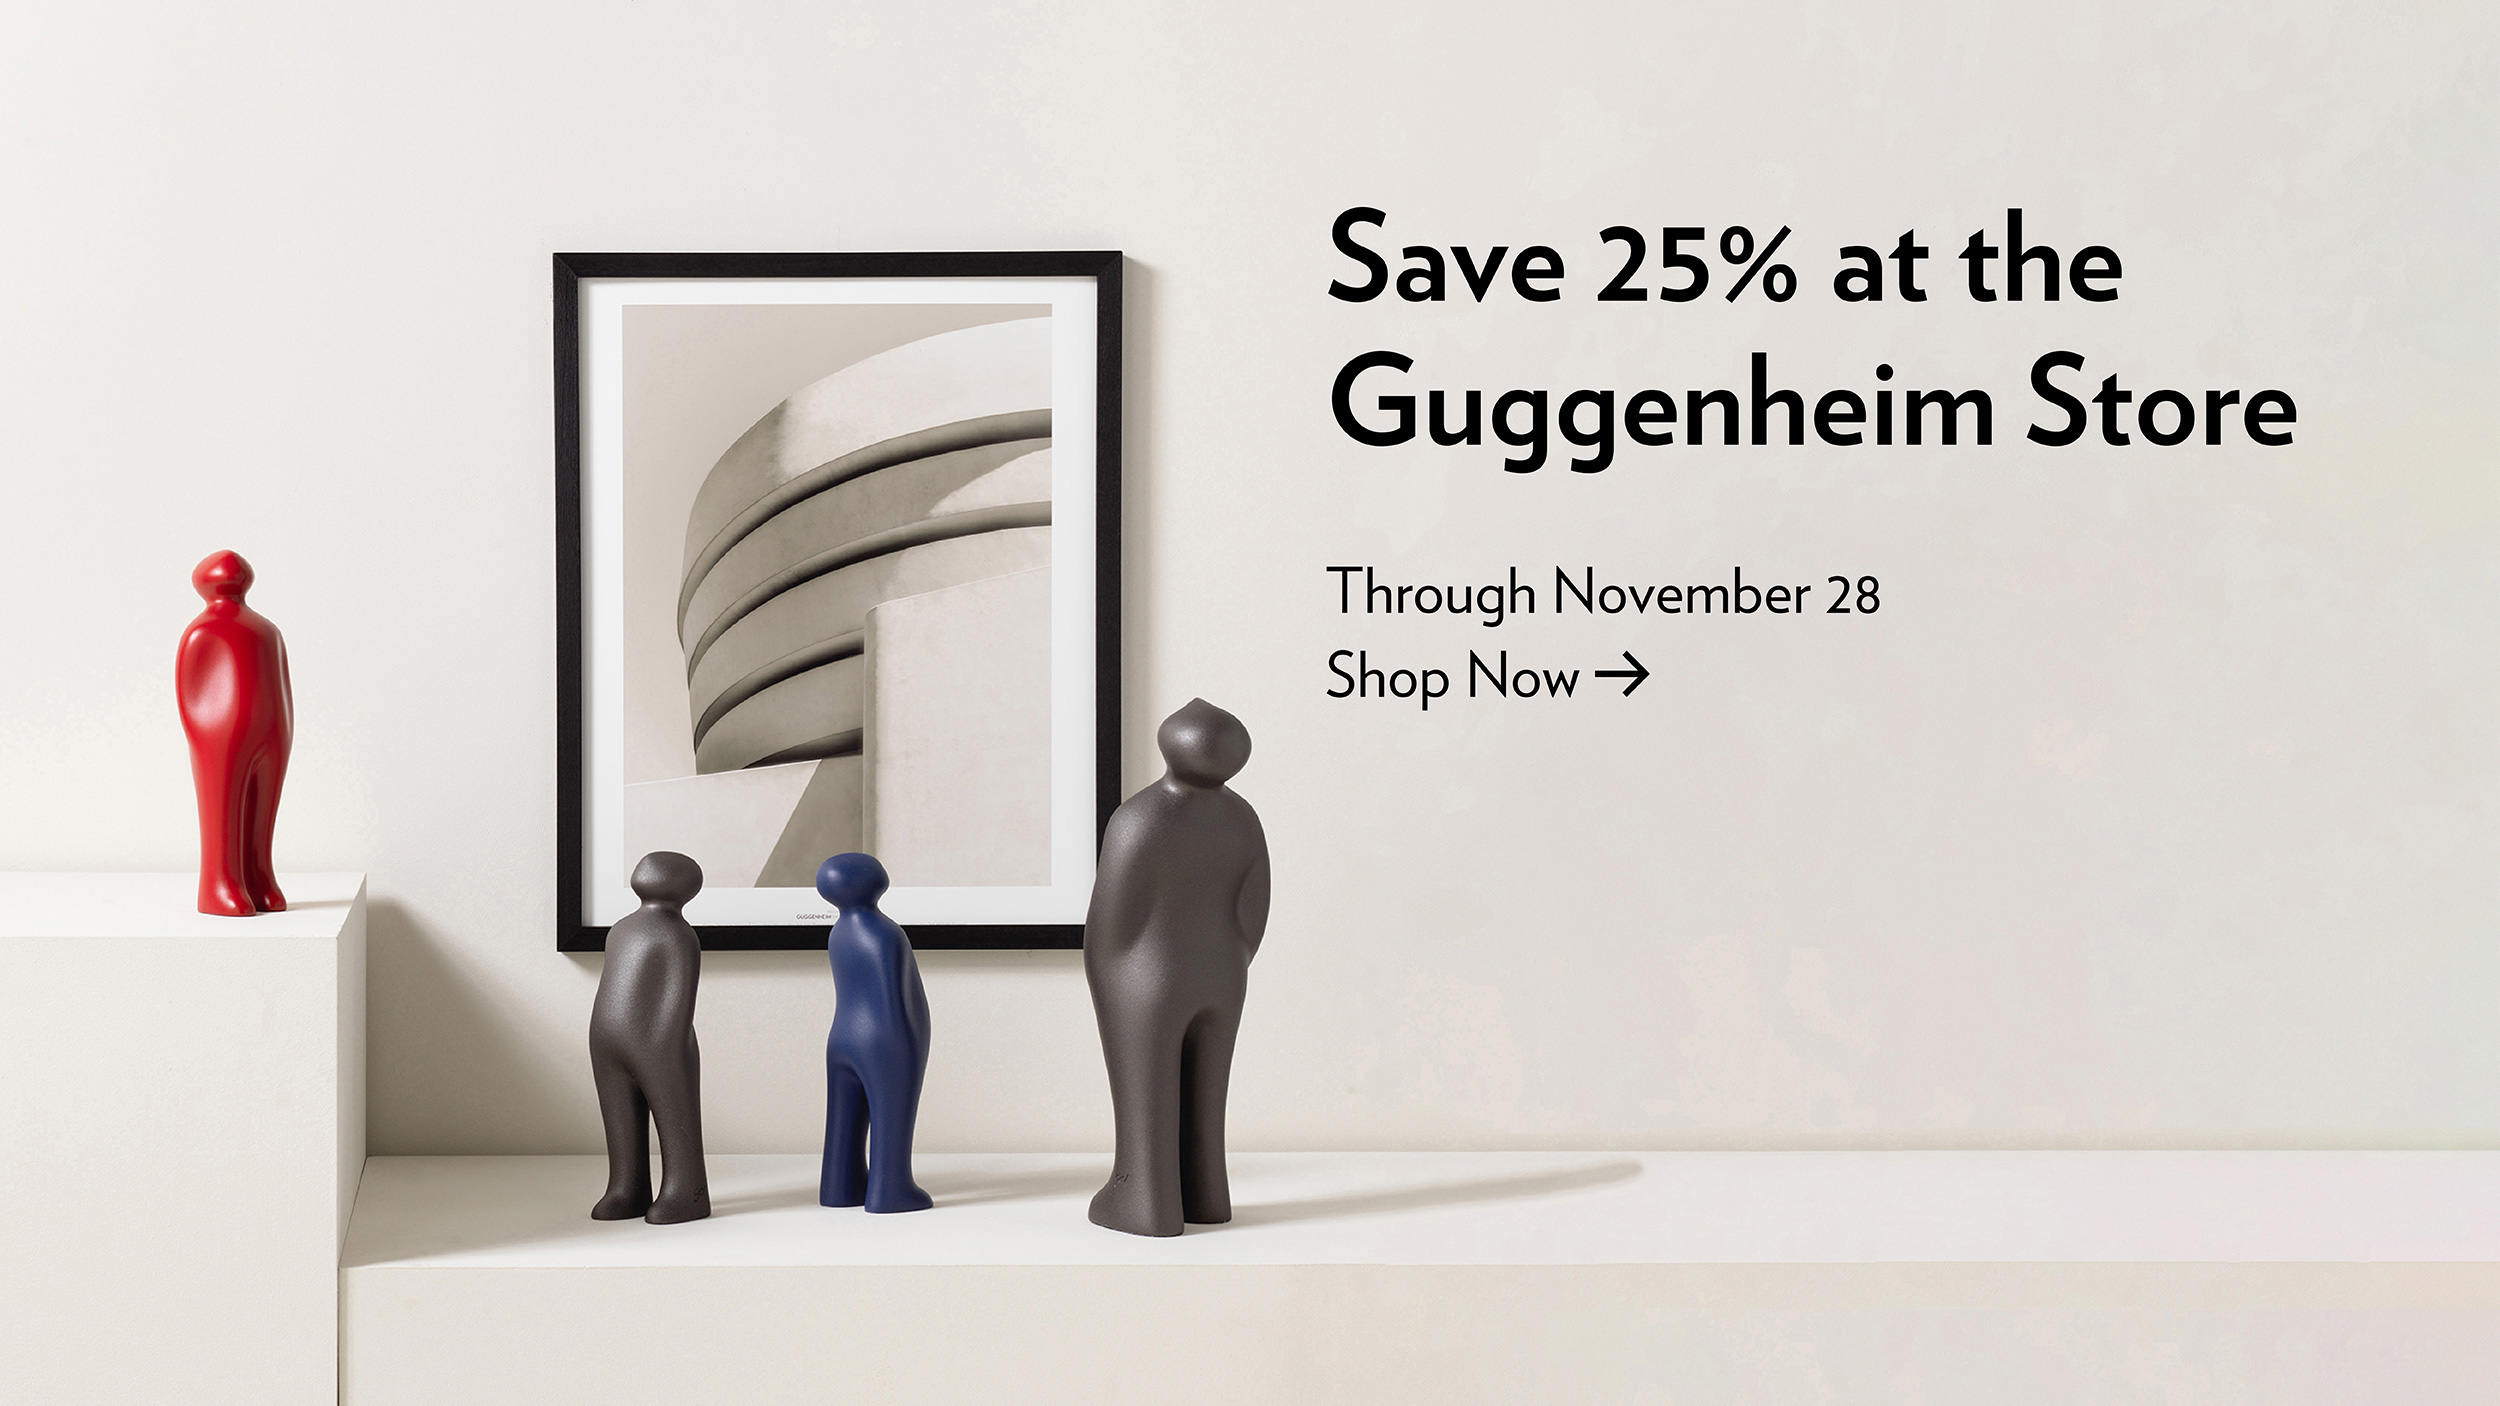 Small sculptures of museum visitors looking up at a picture of the Guggenheim Museum with the text Save 25% at the Guggenheim Store through November 28 Shop Now